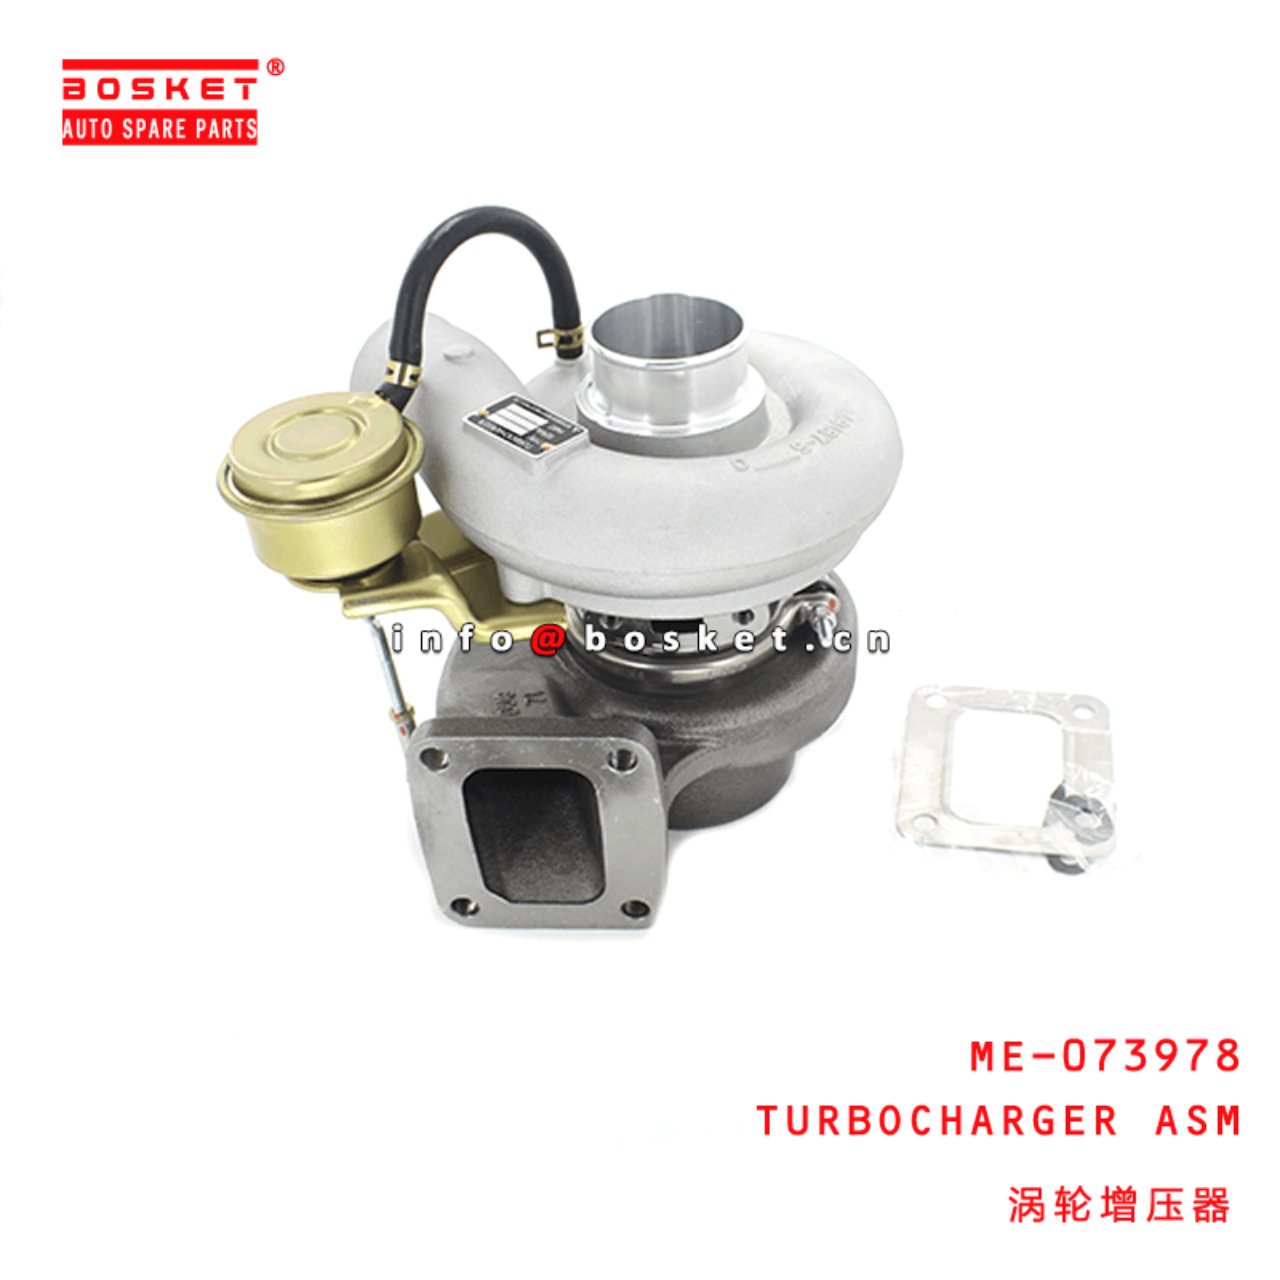 ME-073978 Turbocharger Assembly Suitable For MITSUBISHI FUSO 